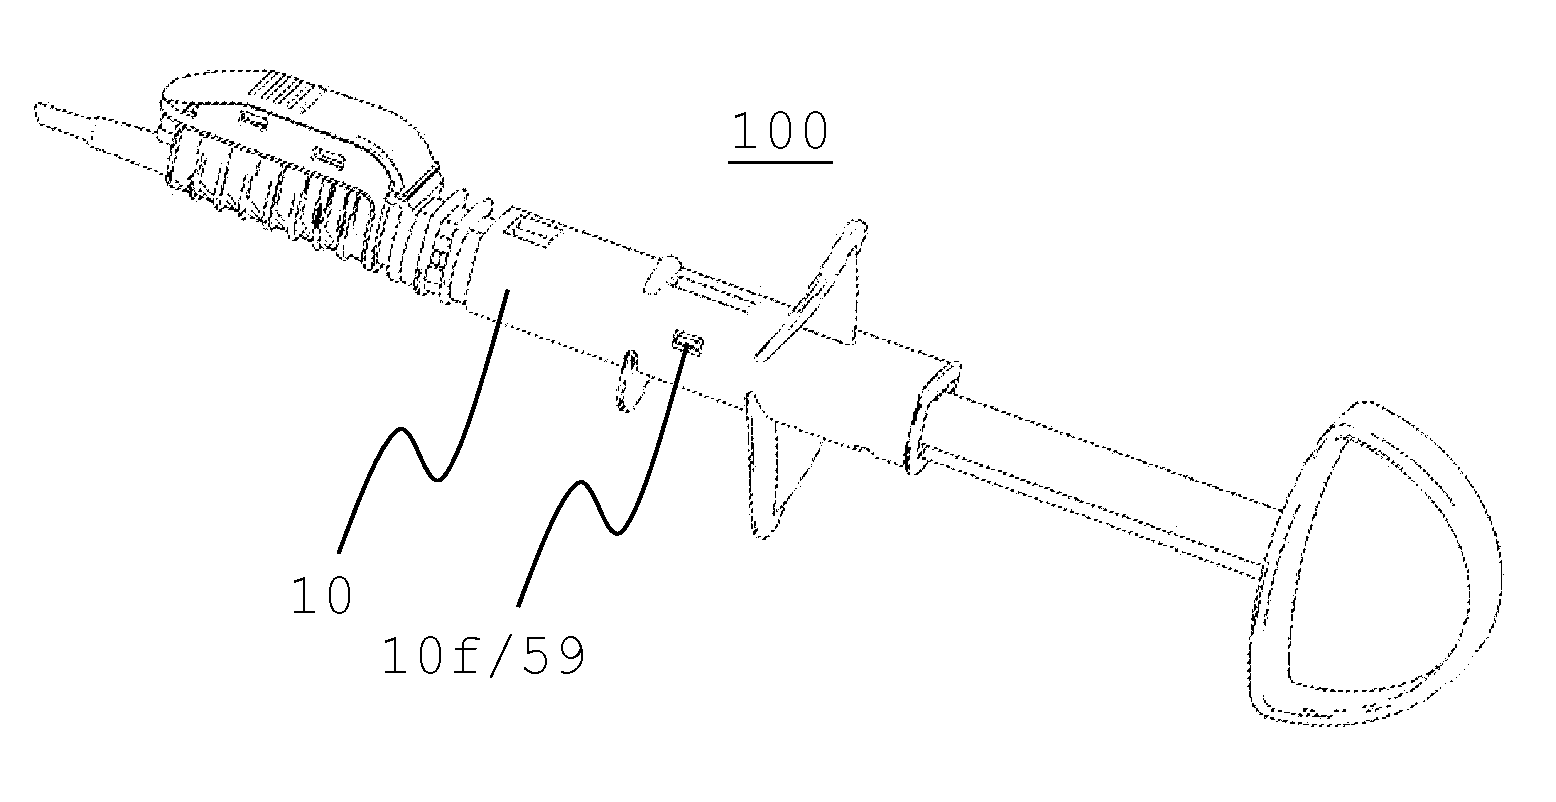 Injector for implanting an intraocular lens